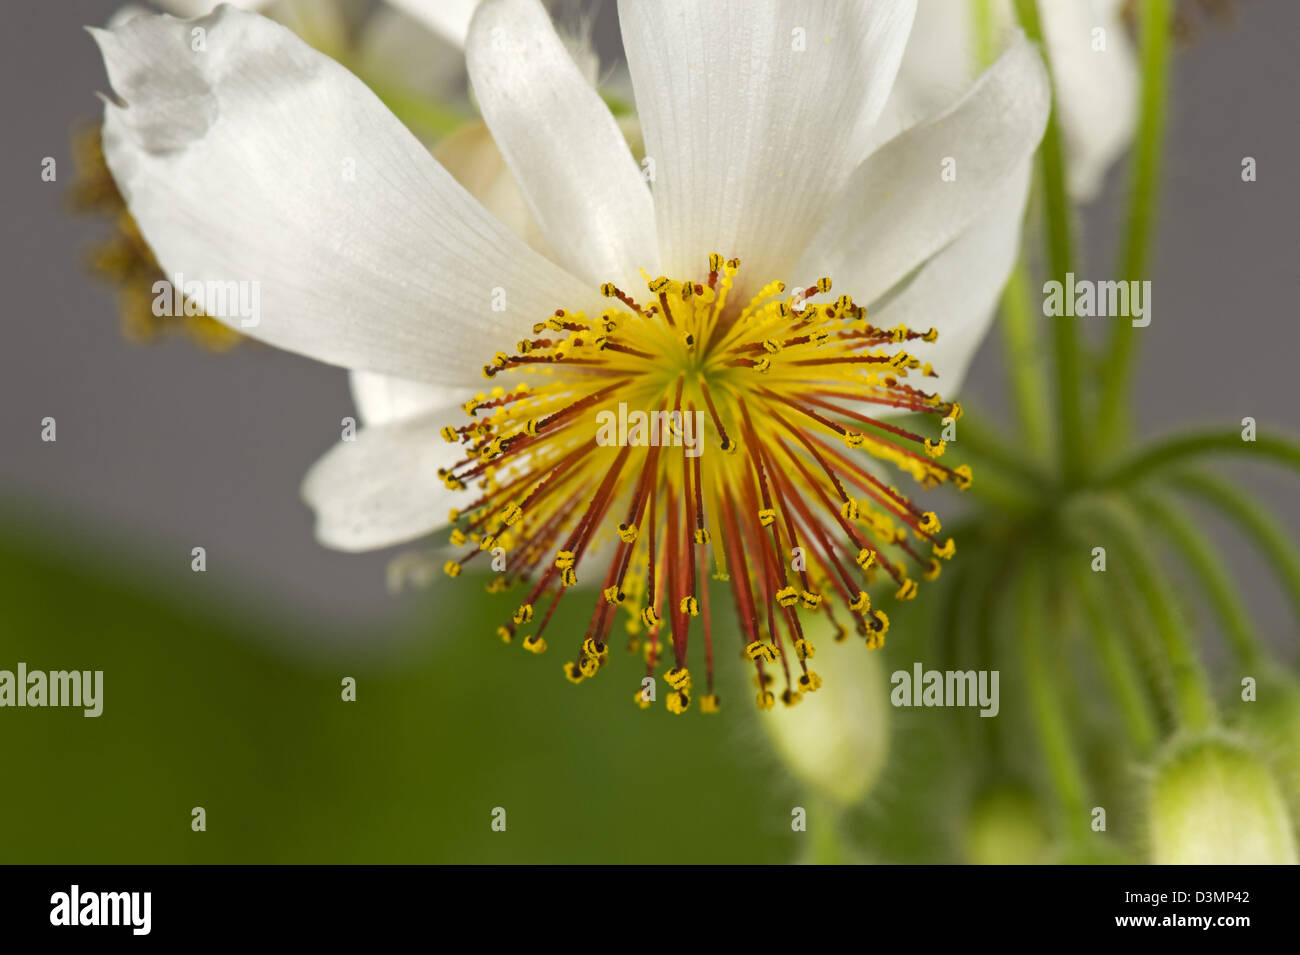 African hemp, Sparrmannia africana, flower with open stamens, filaments and anthers after reacting to touch Stock Photo